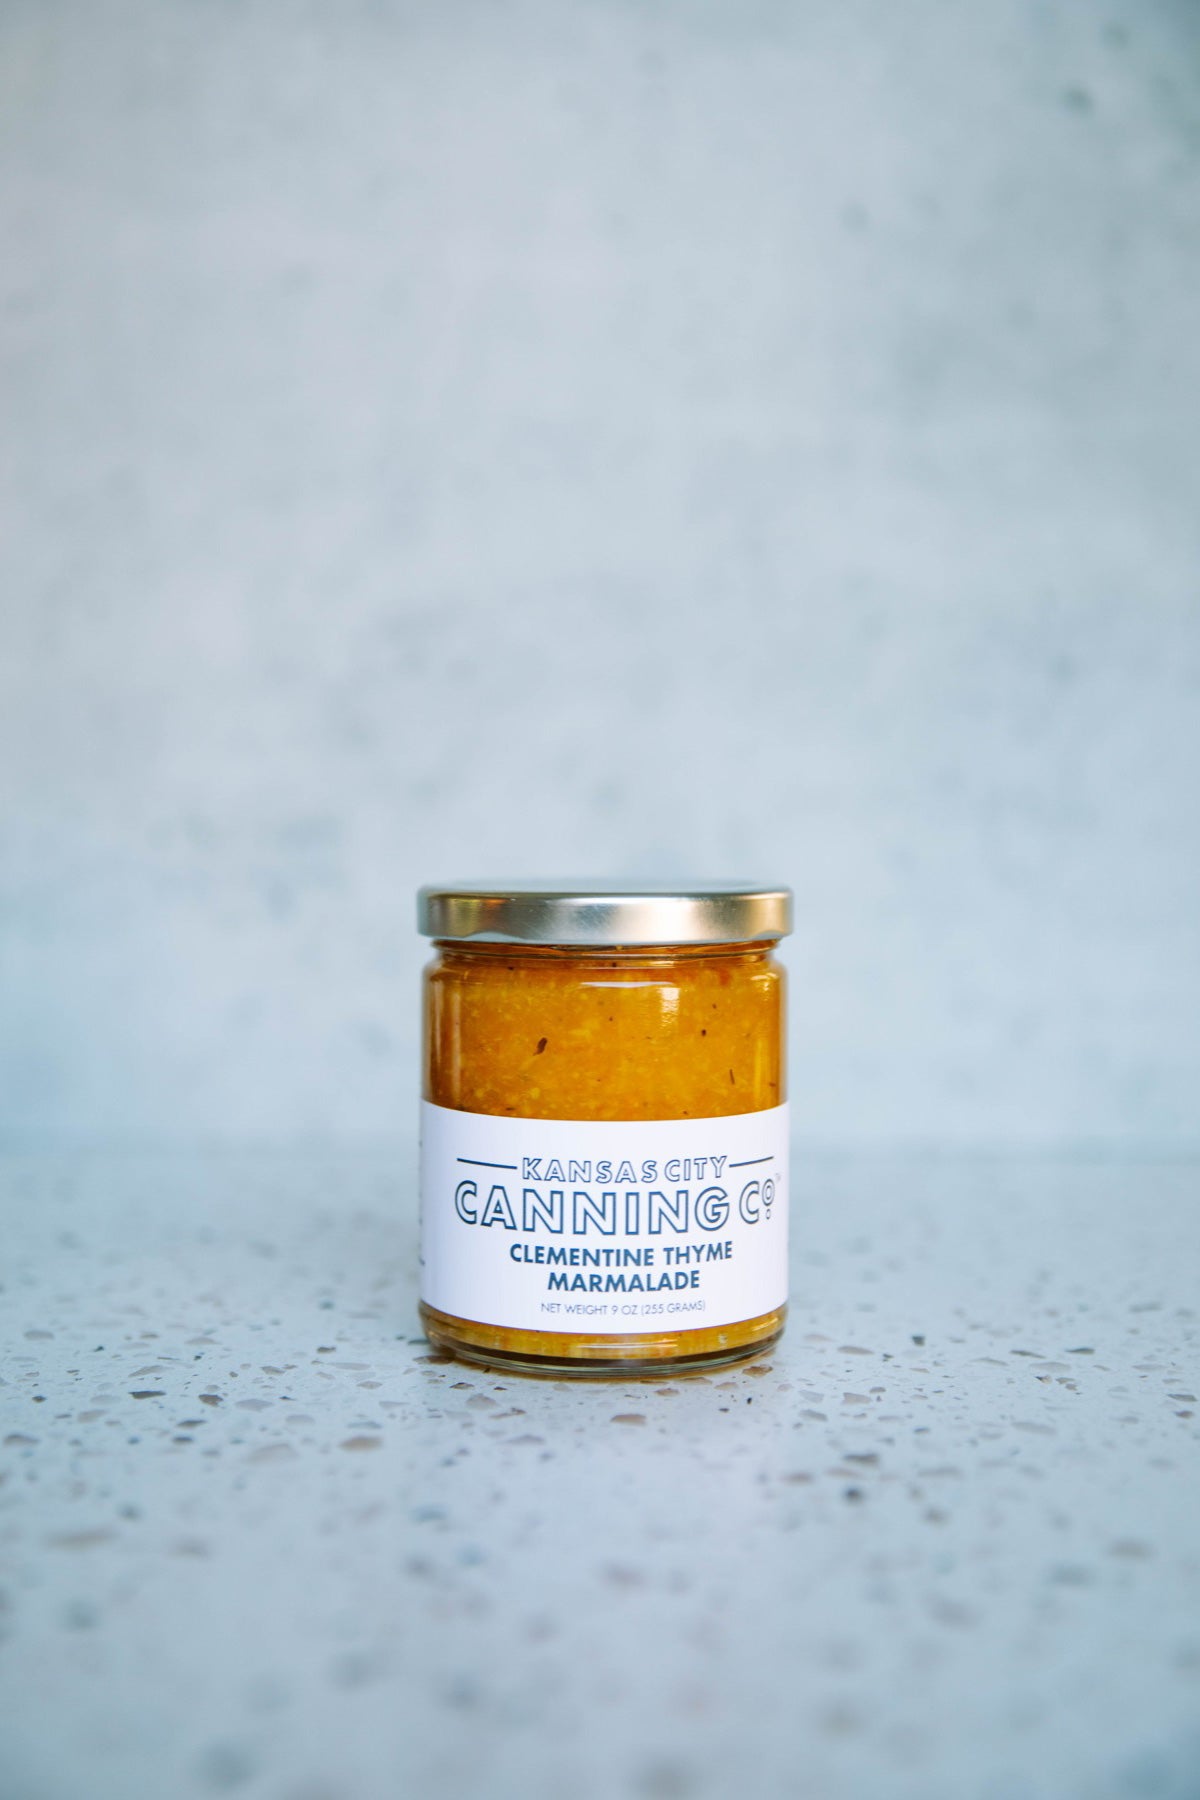 Clementine Thyme Marmalade - Kansas City Canning Co.